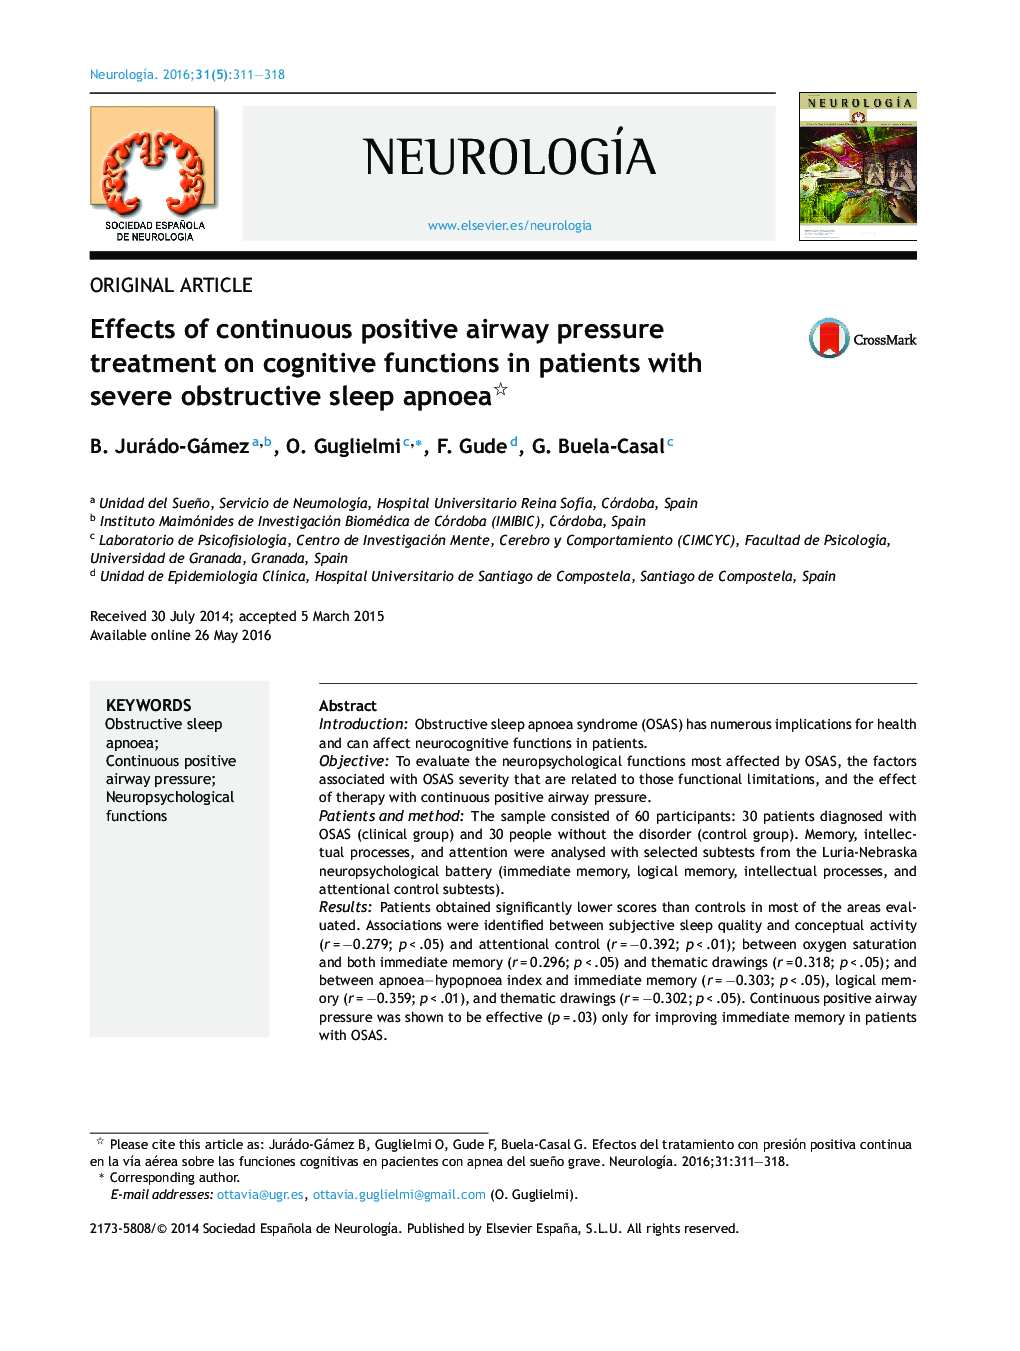 Effects of continuous positive airway pressure treatment on cognitive functions in patients with severe obstructive sleep apnoea 